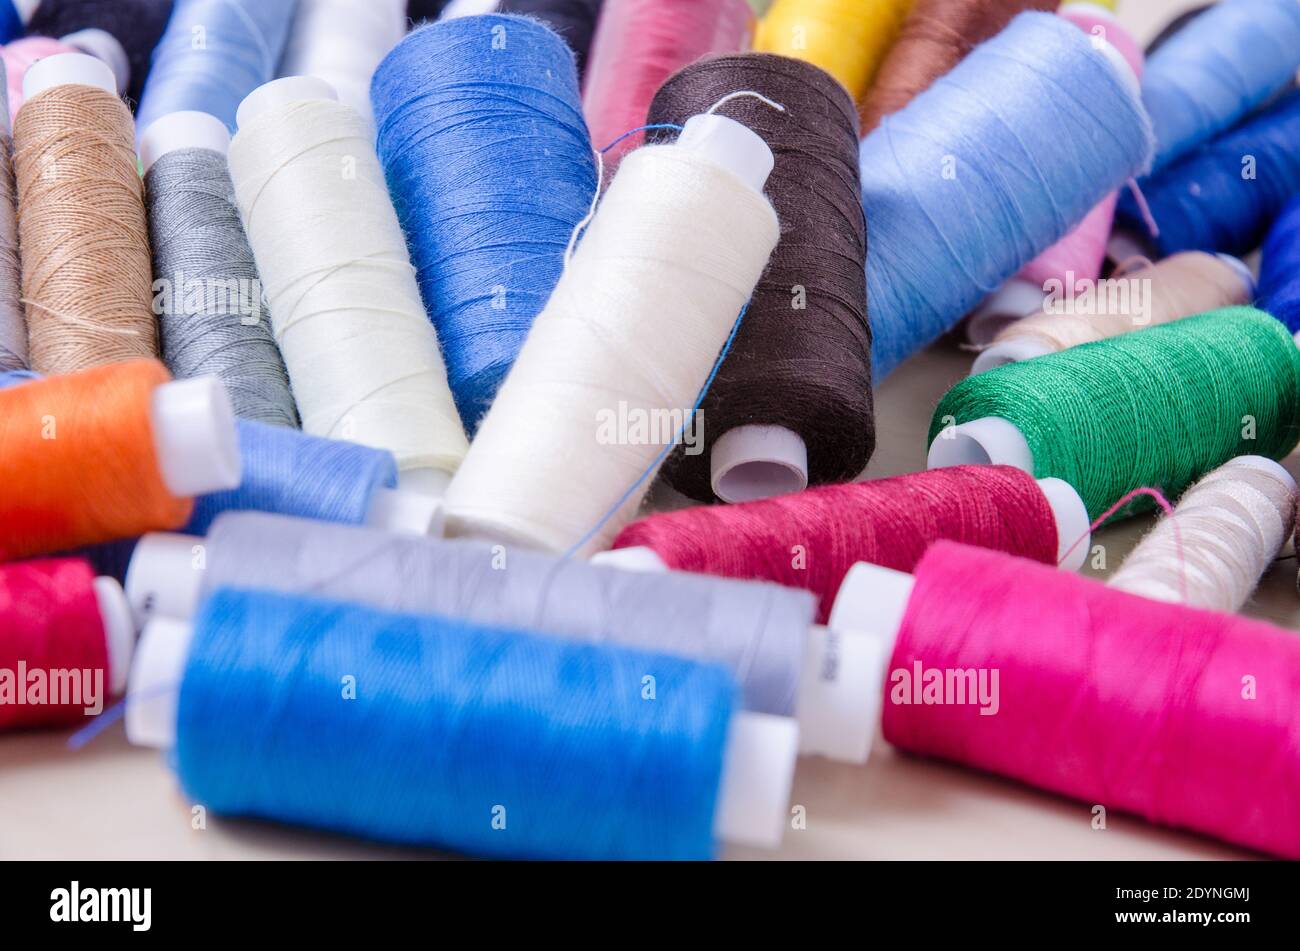 Flat lay of spools with colorful threads on wooden desk or table, home crafting, indoors, sewing kit, close-up Stock Photo